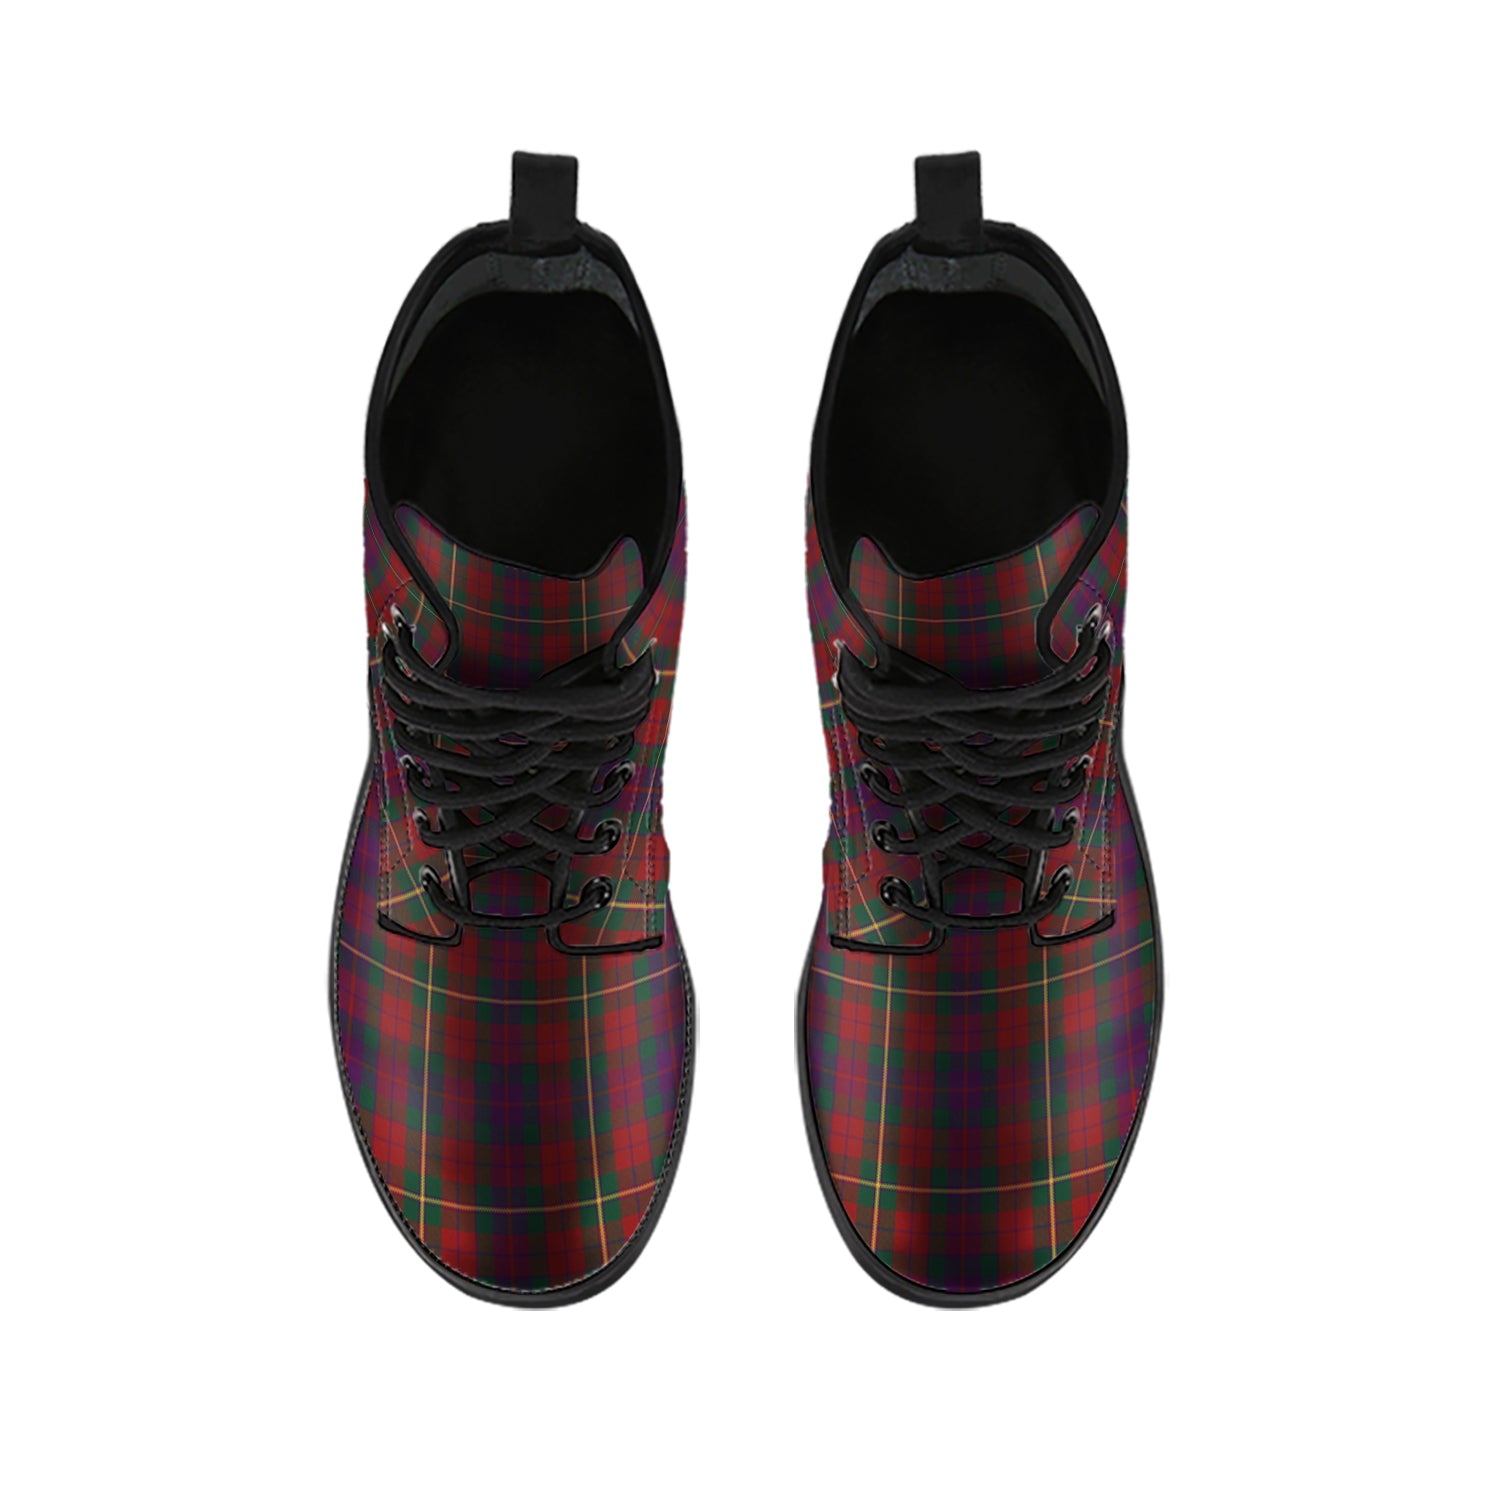 clare-tartan-leather-boots